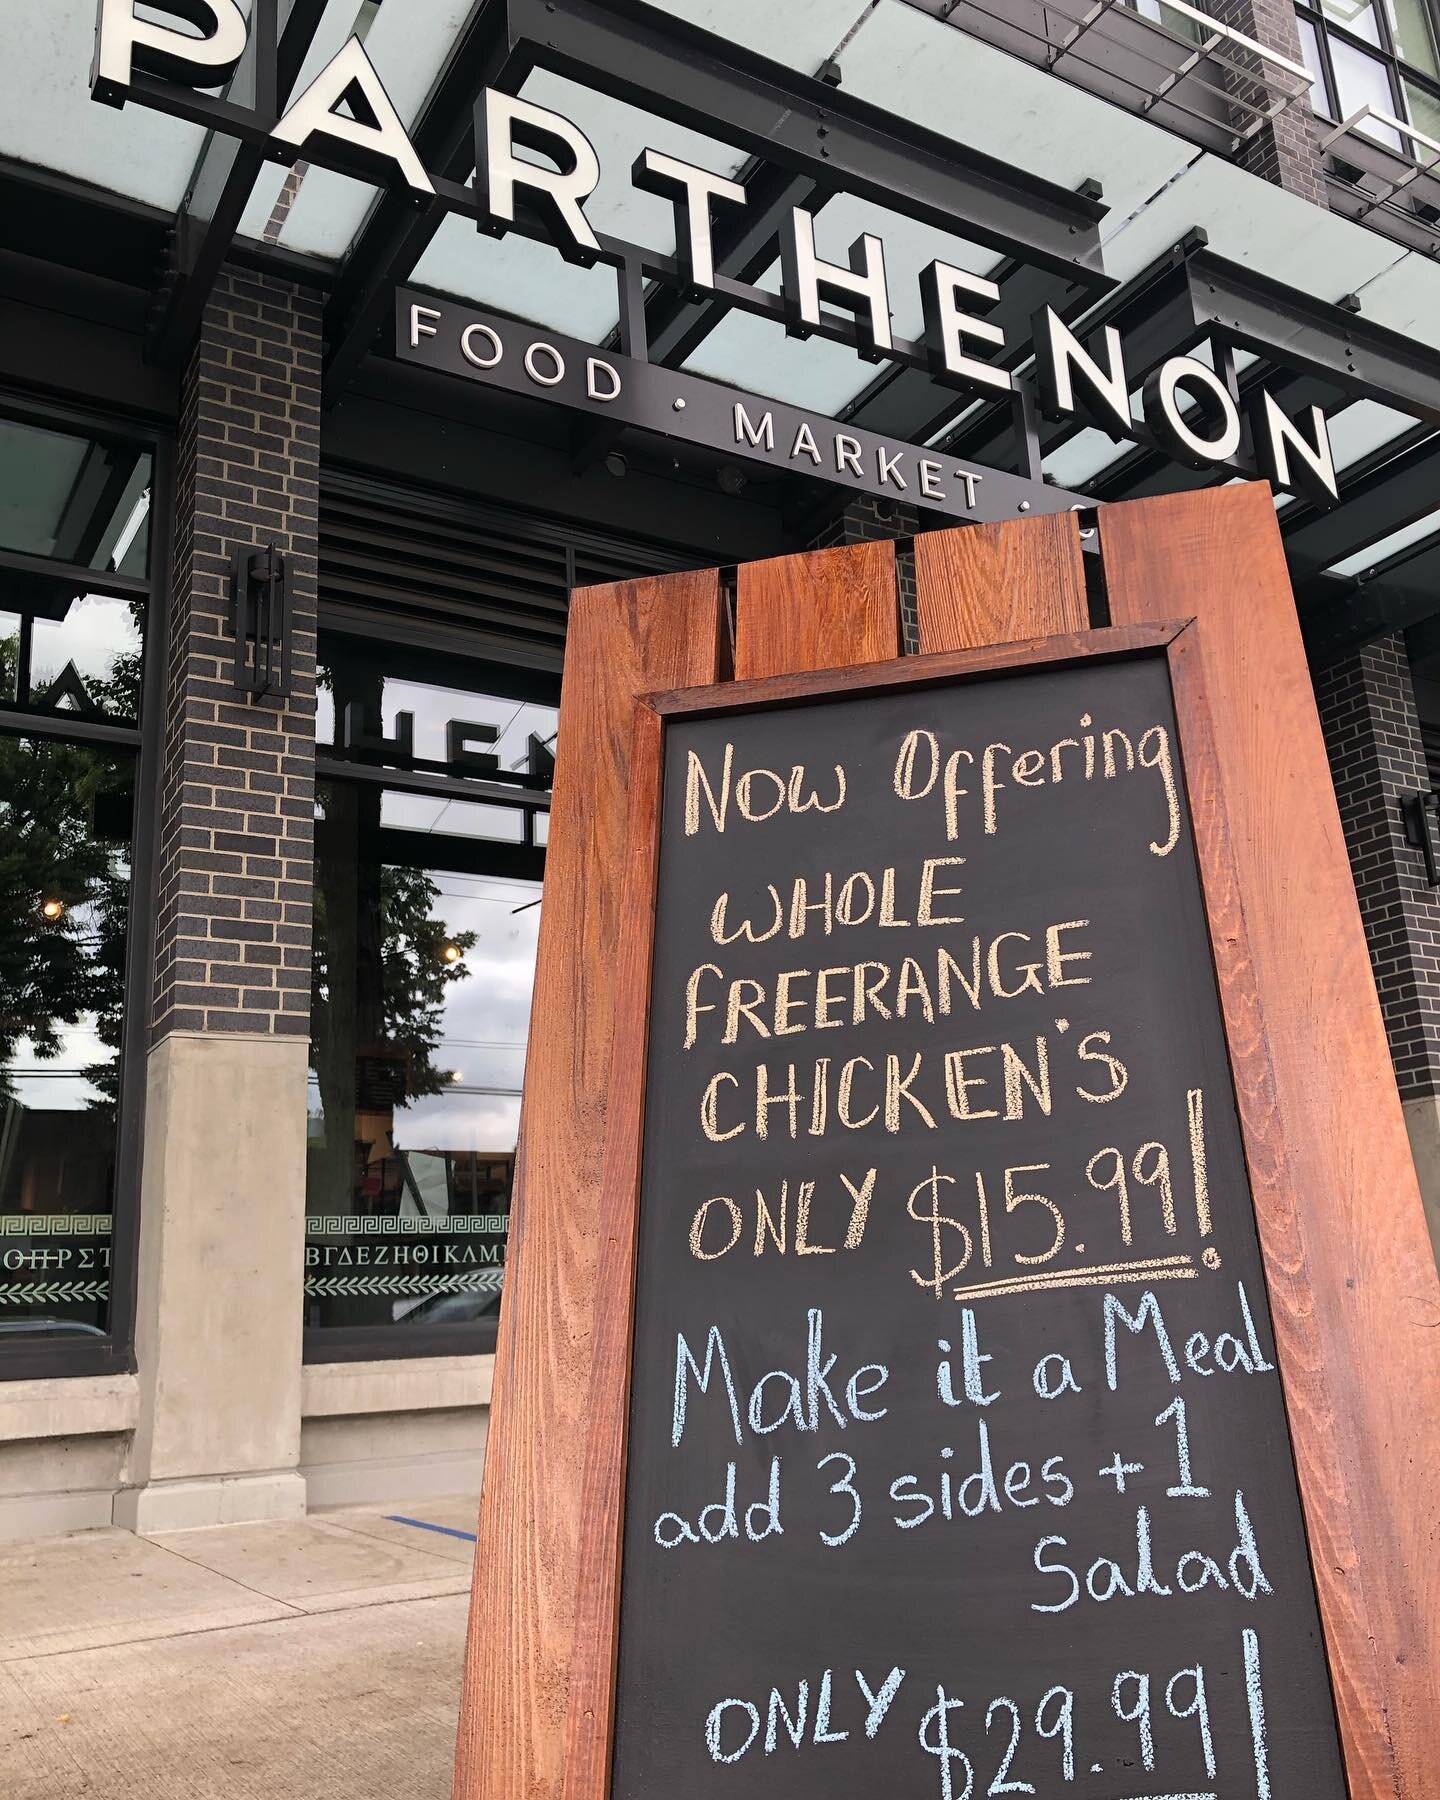 Stop by and try our delicious whole freerange chicken $15.99 and chicken meal! Which comes with 3 sides and 1 salad for only 29.99🍗🥗 Or order for delivery straight to your home with your grocery order! Please call or come in for more details 604-73